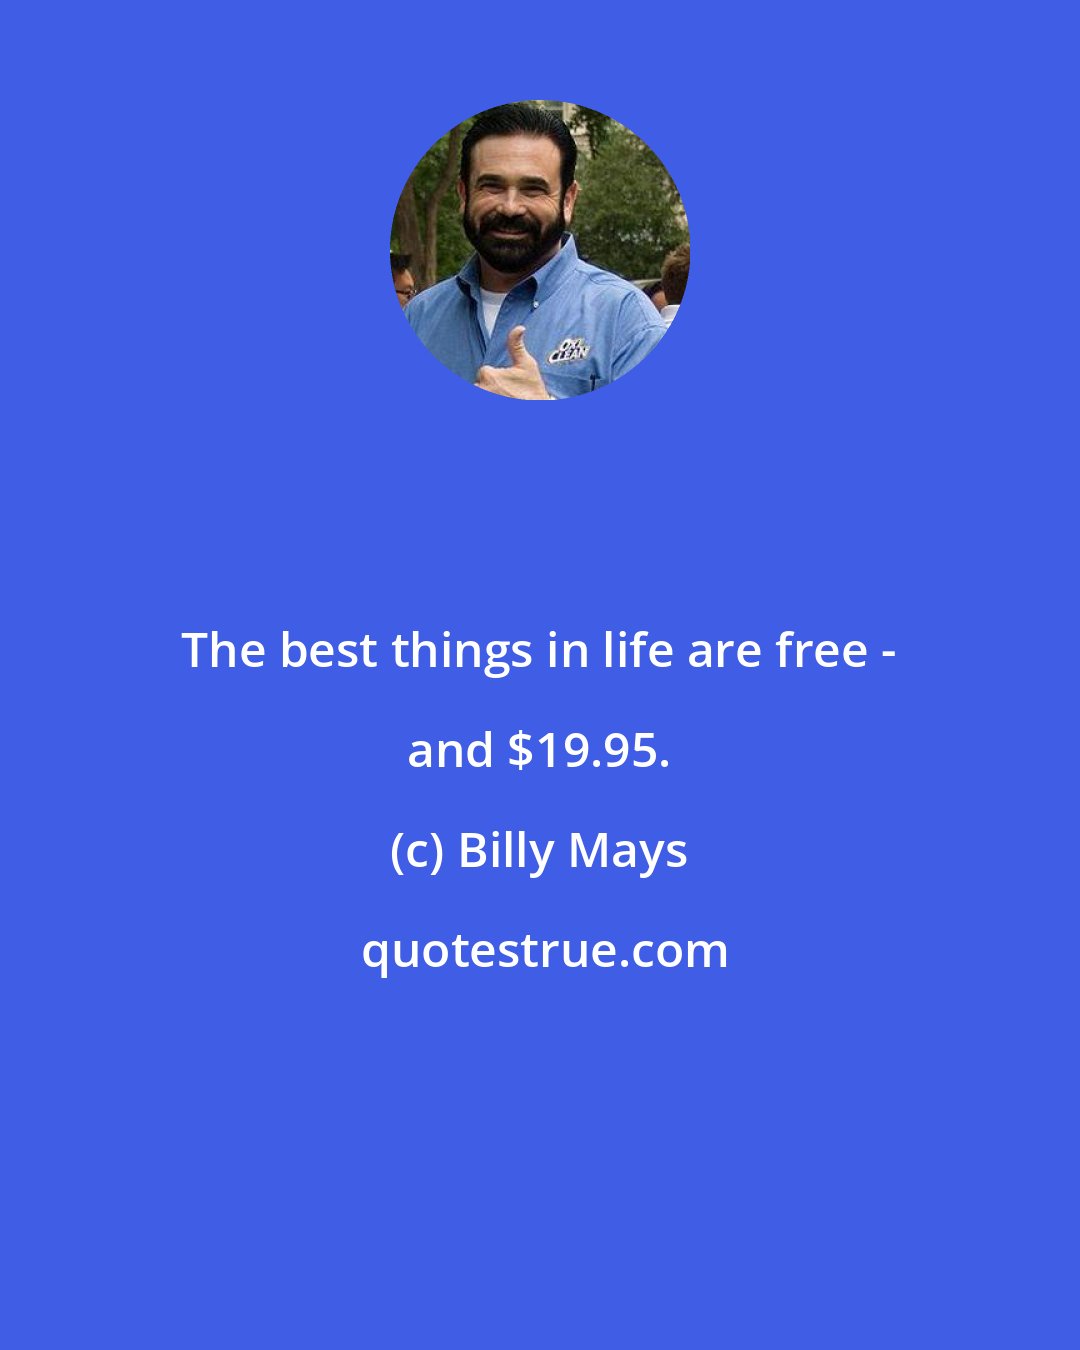 Billy Mays: The best things in life are free - and $19.95.